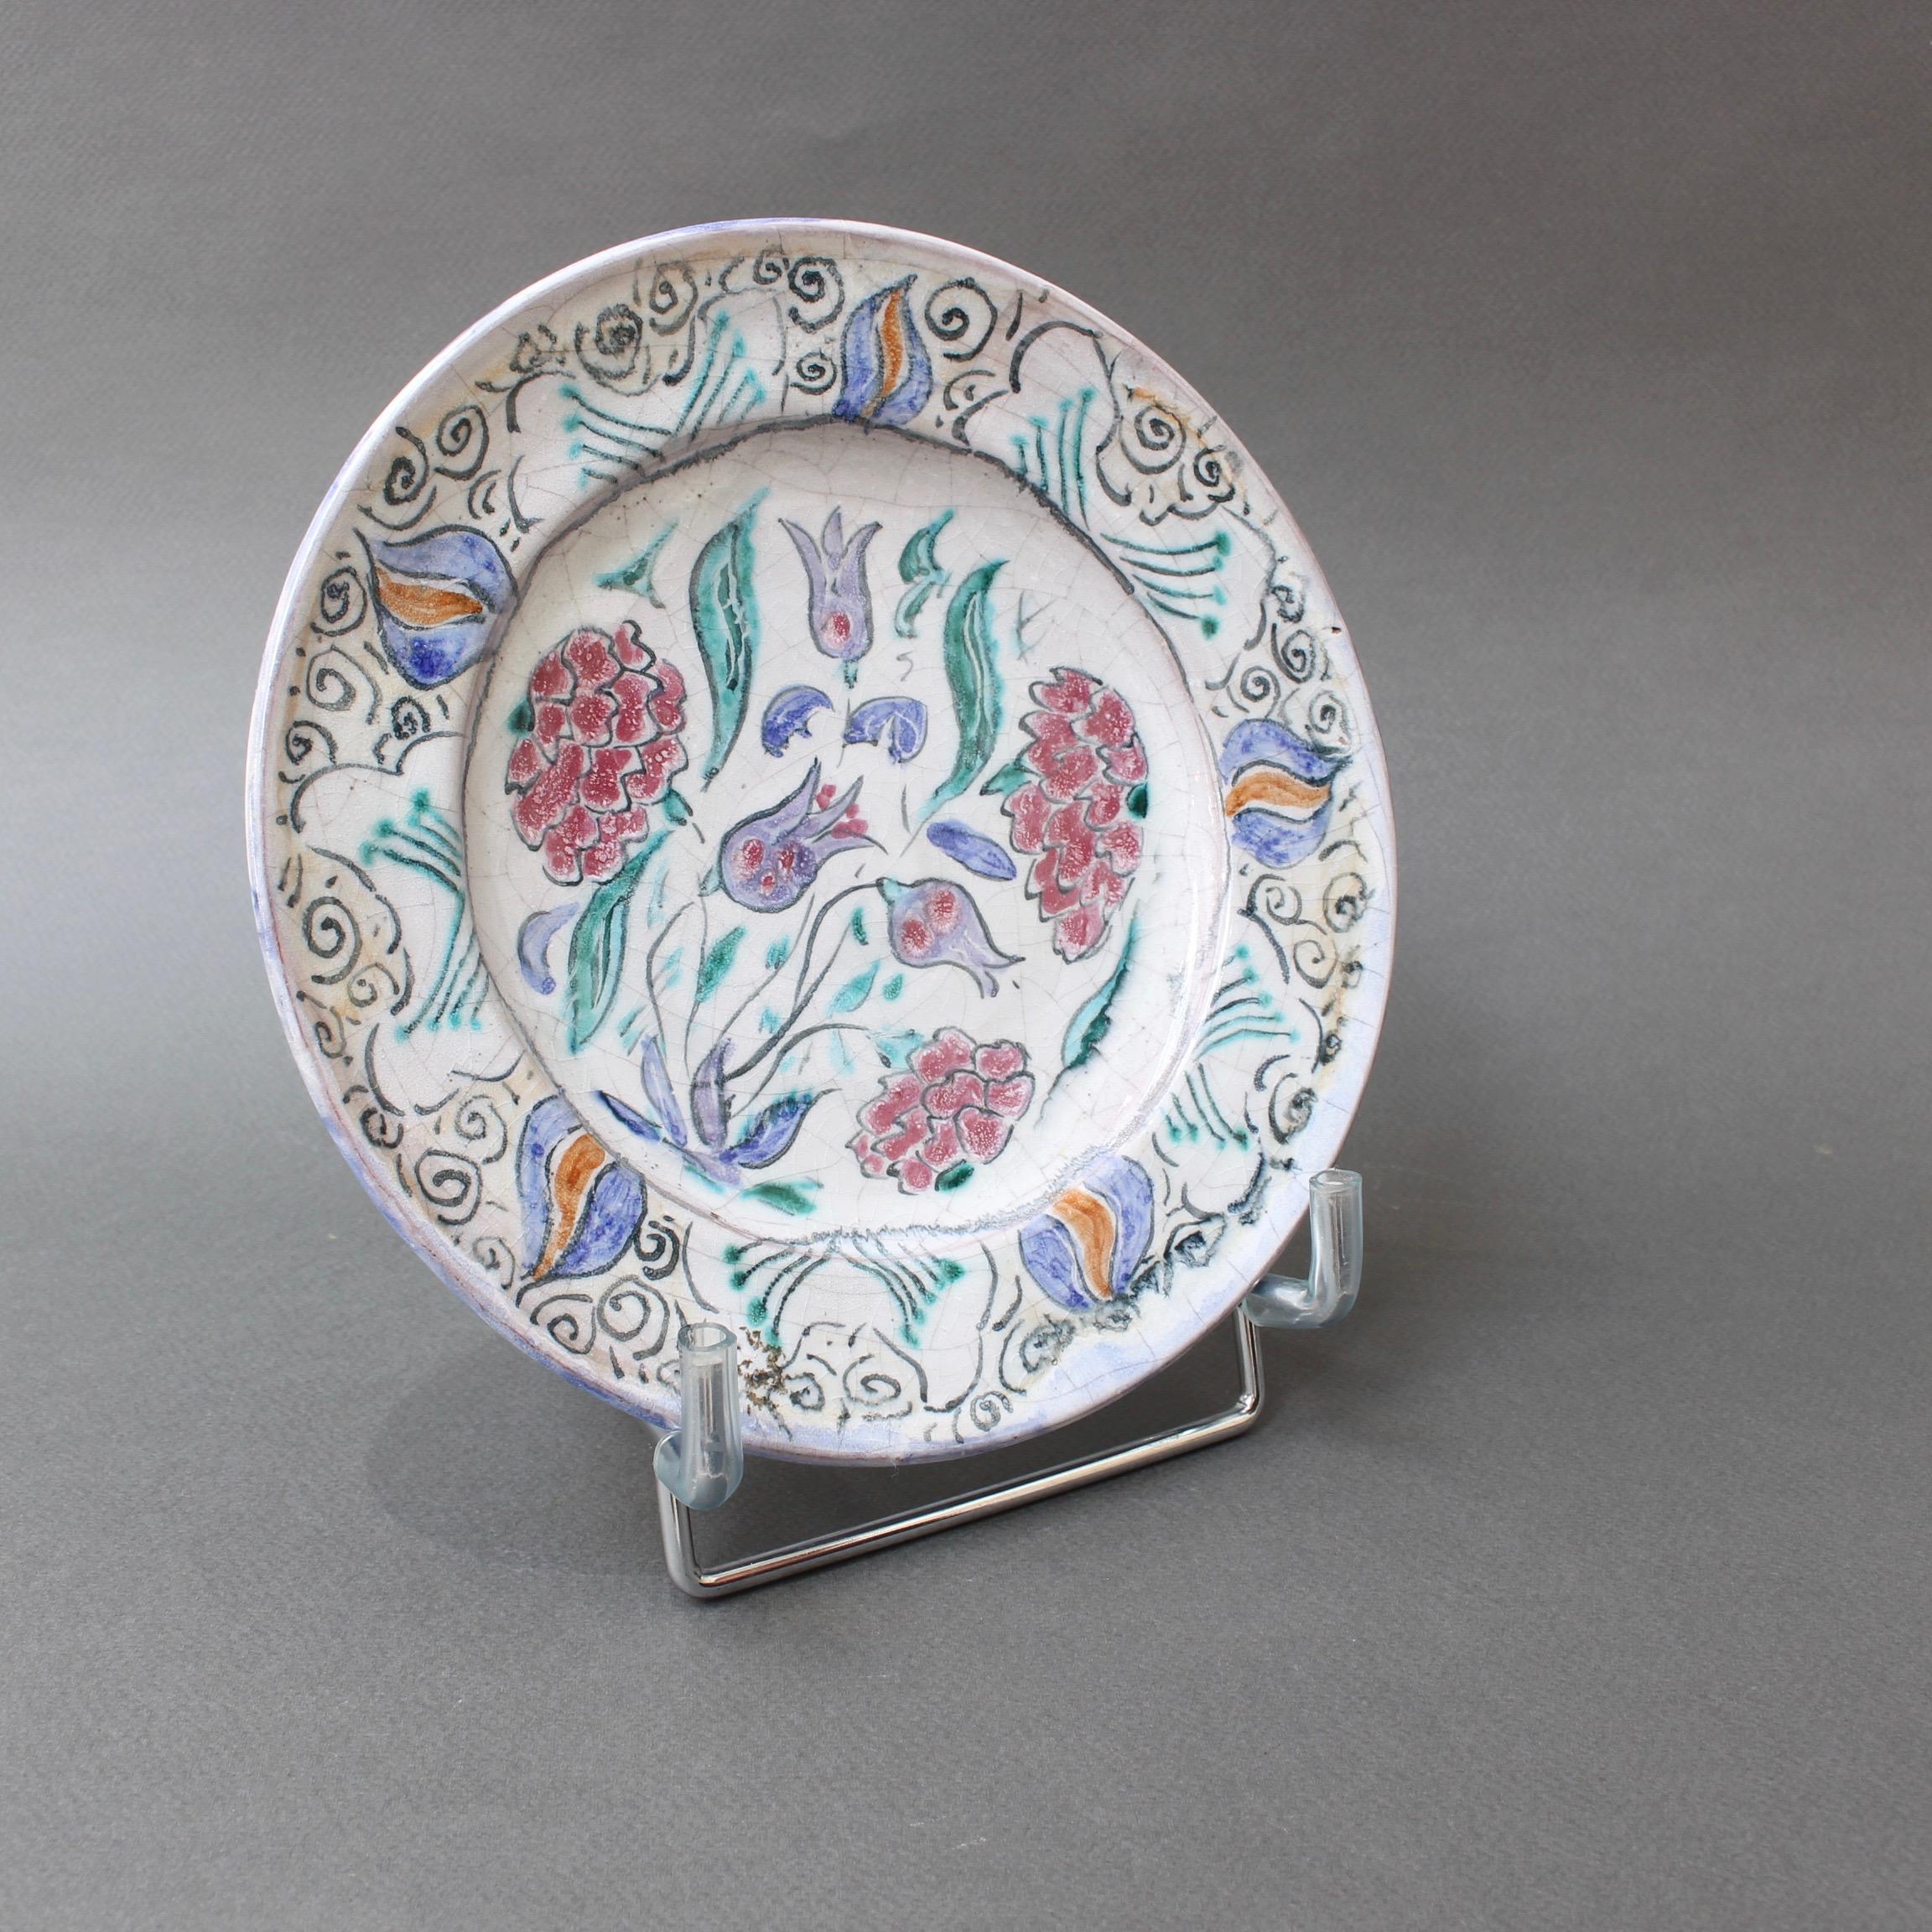 Mid-20th Century French Iznik-Inspired Ceramic Decorative Plate by Édouard Cazaux, circa 1930s For Sale